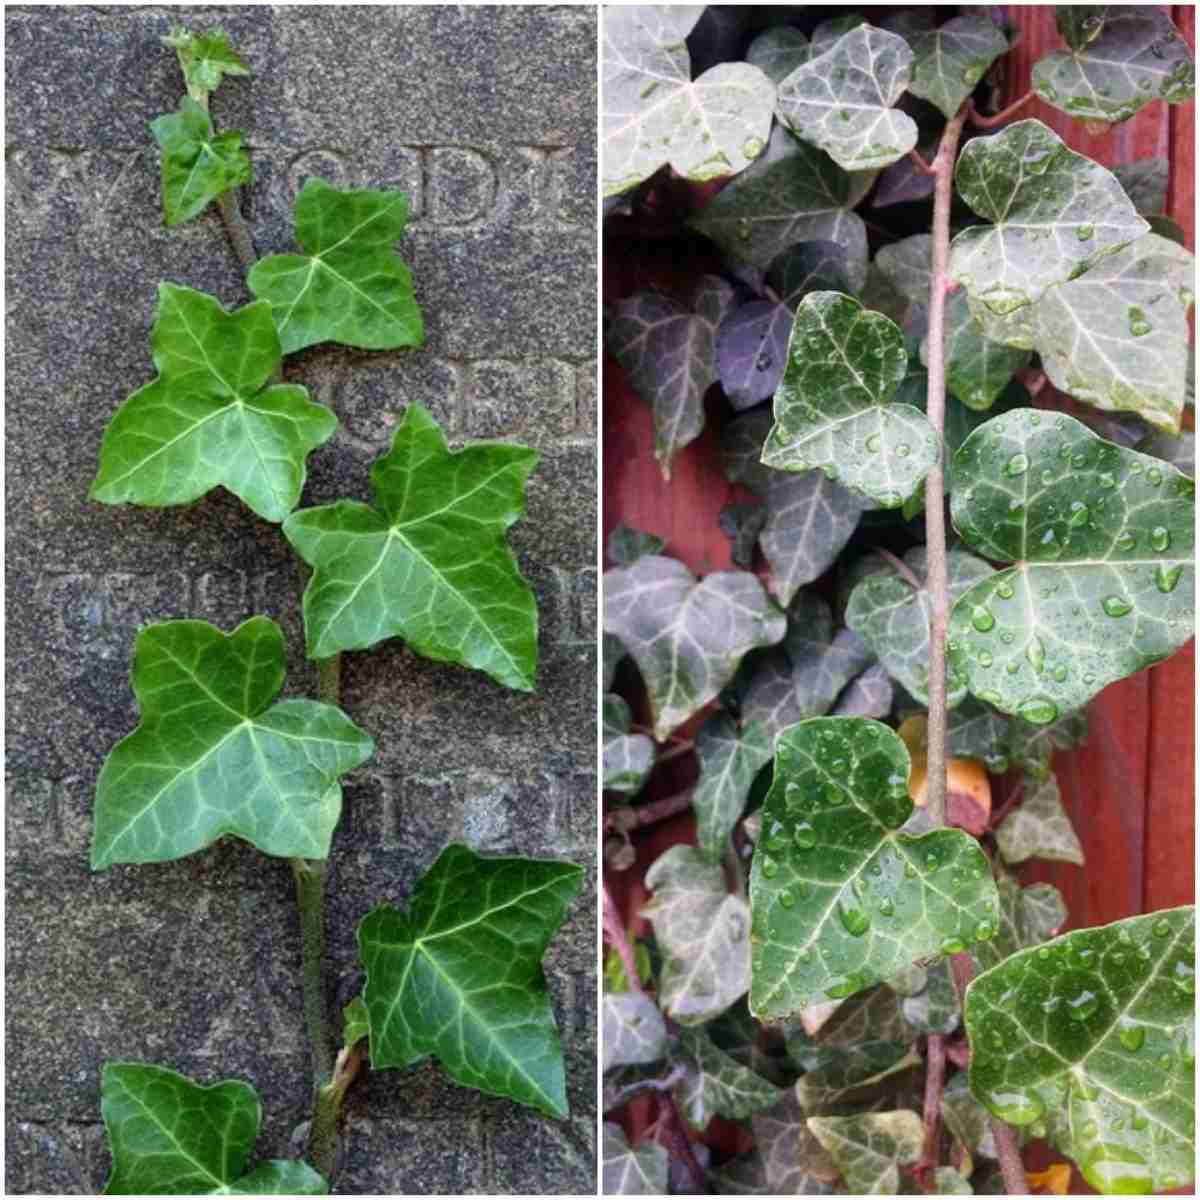 Conditions for growing English ivy.